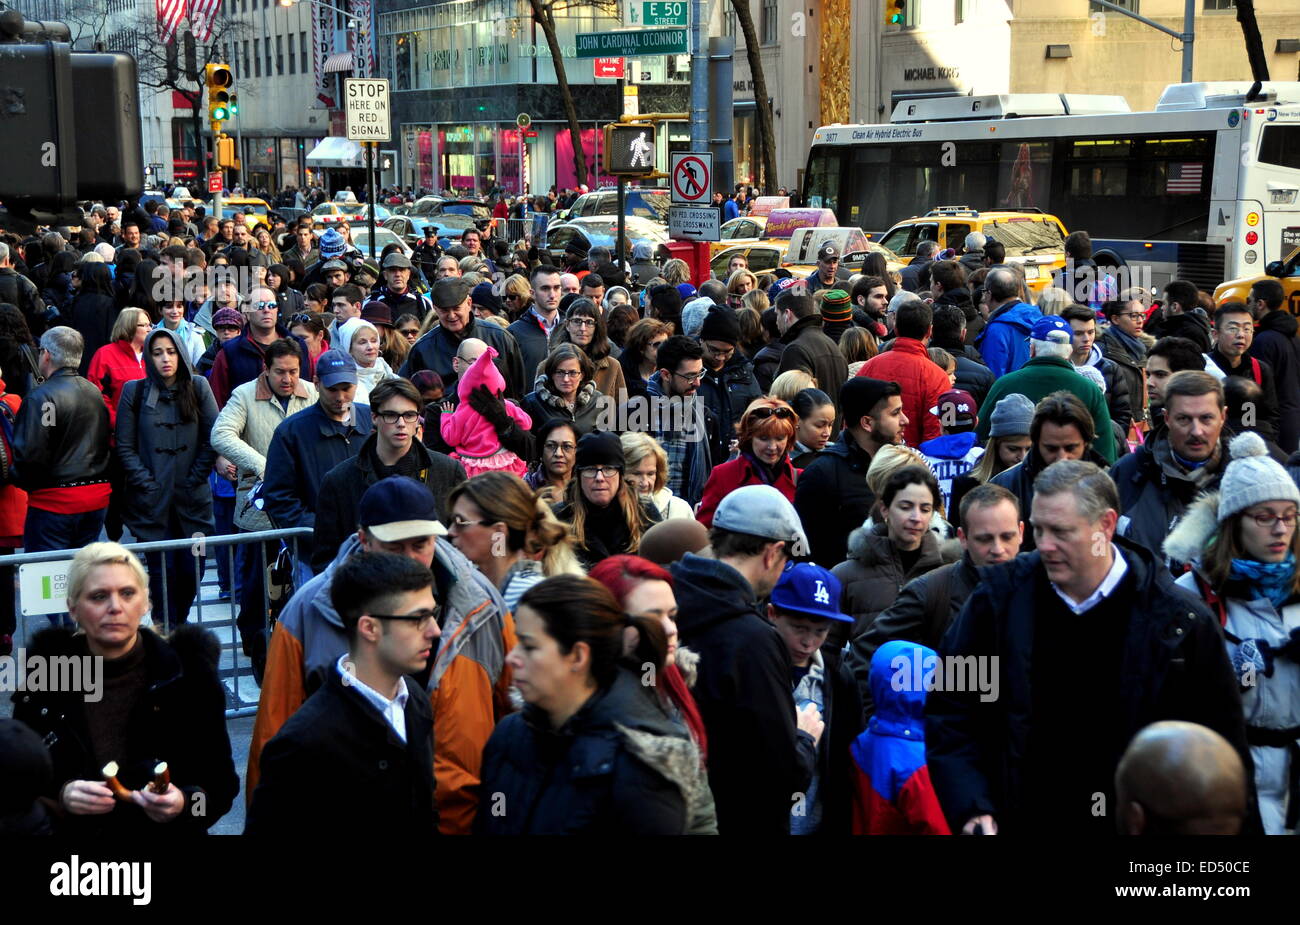 New York City - December 26, 2014:  Throngs of people walking along Fifth Avenue at 50th Street the day after Christmas Stock Photo